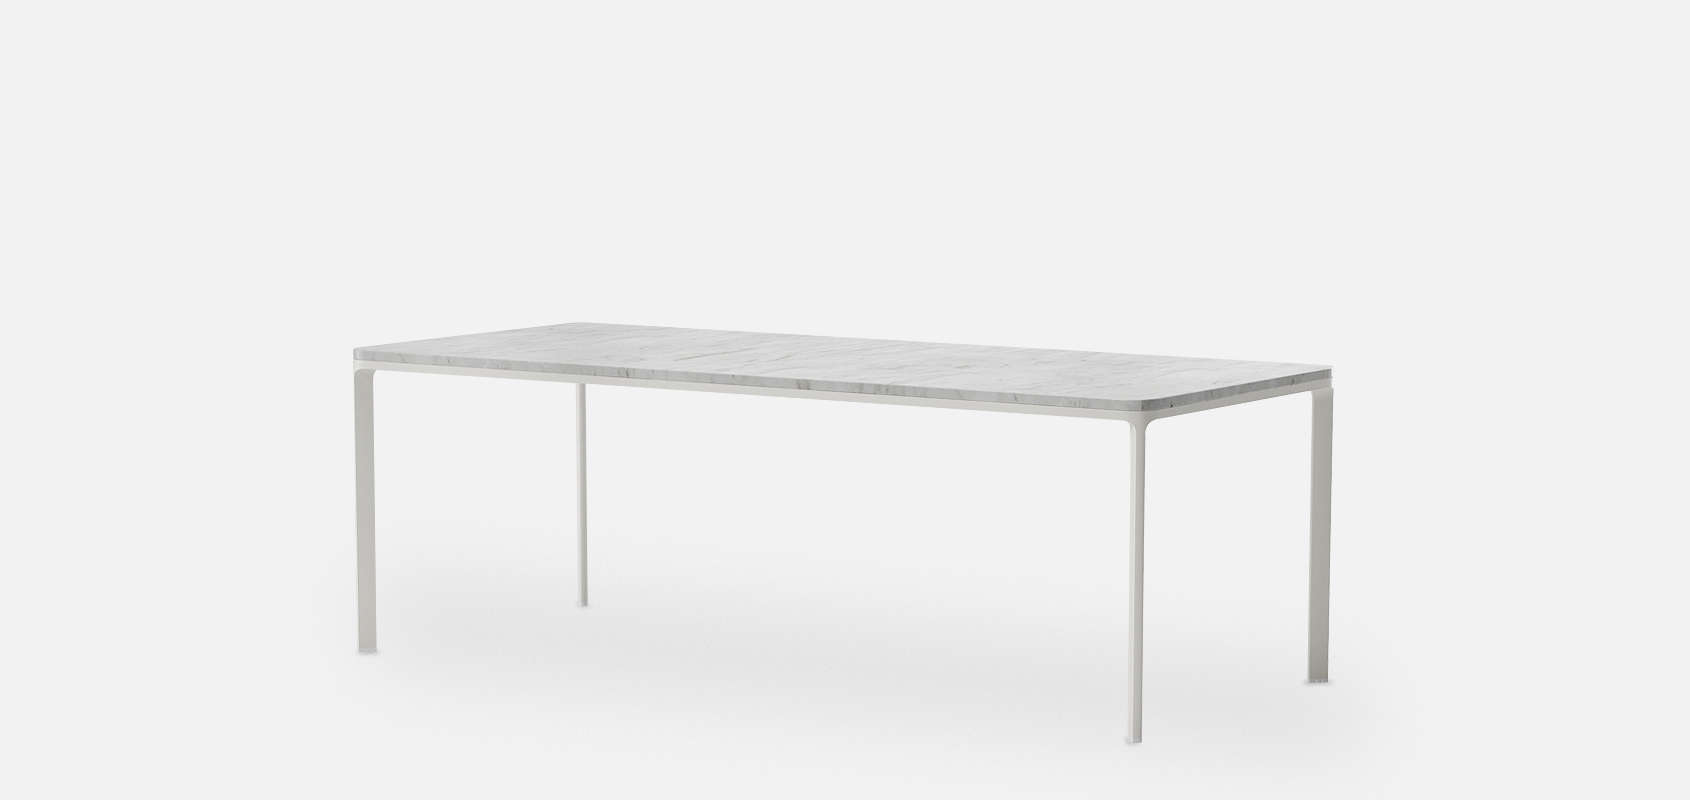 Park Life Table - Large